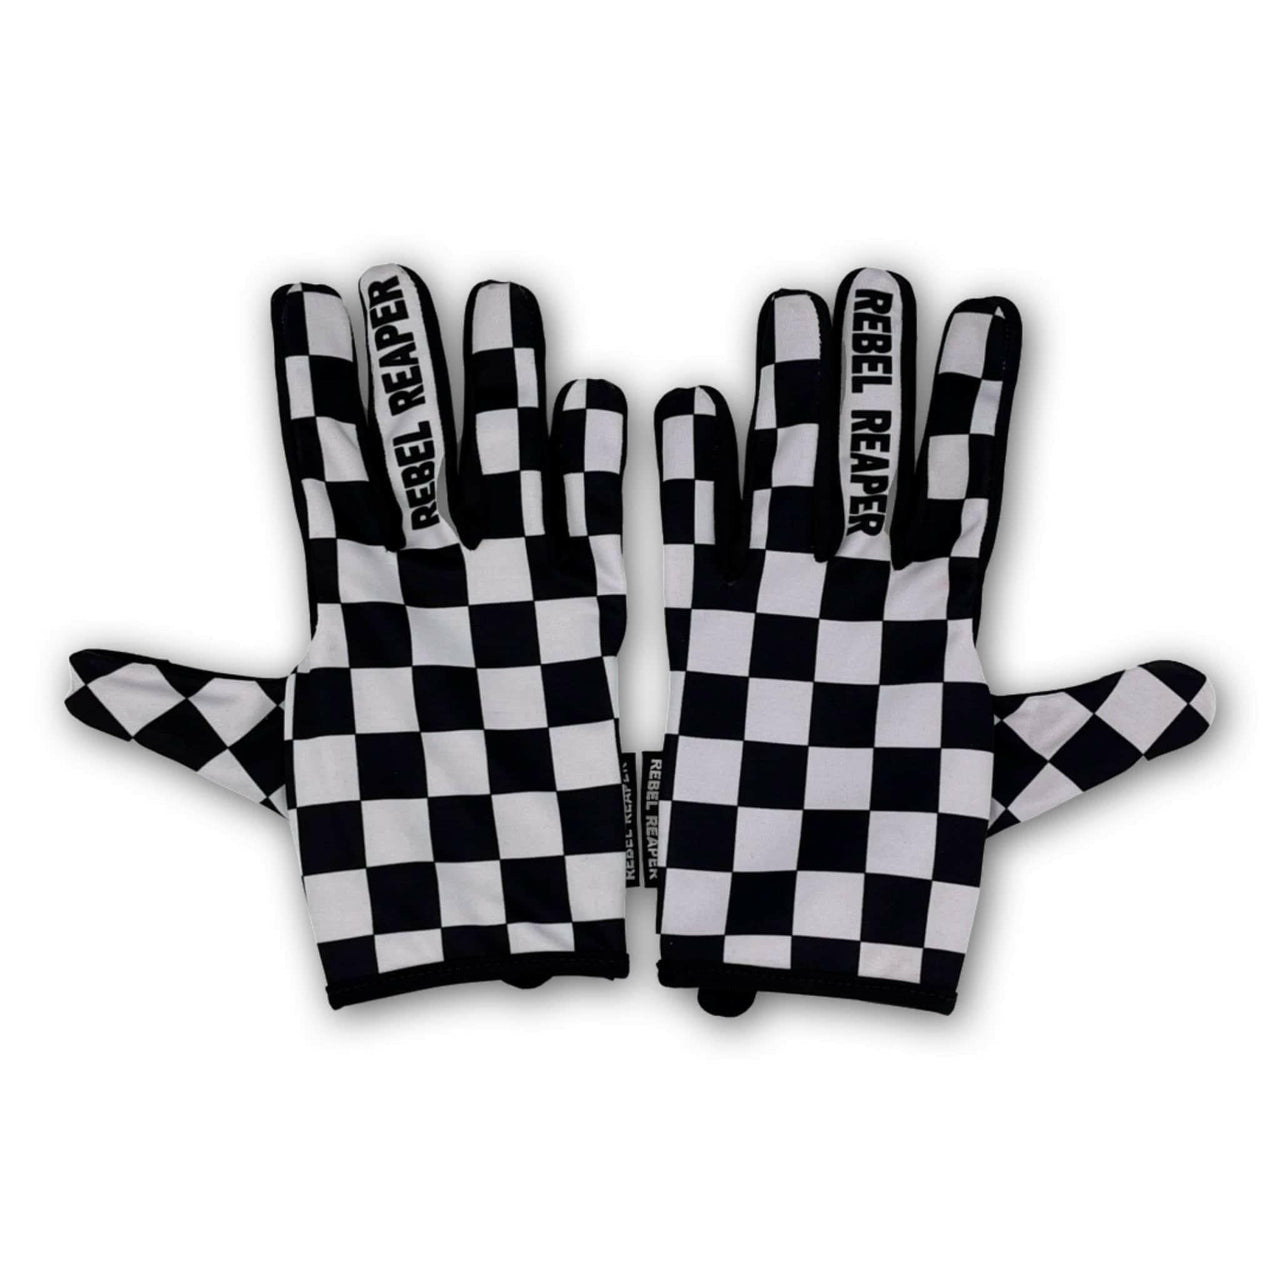 White and Black Checkered Lightweight Gloves - Rebel Reaper Clothing Company Lightweight Moto Gloves